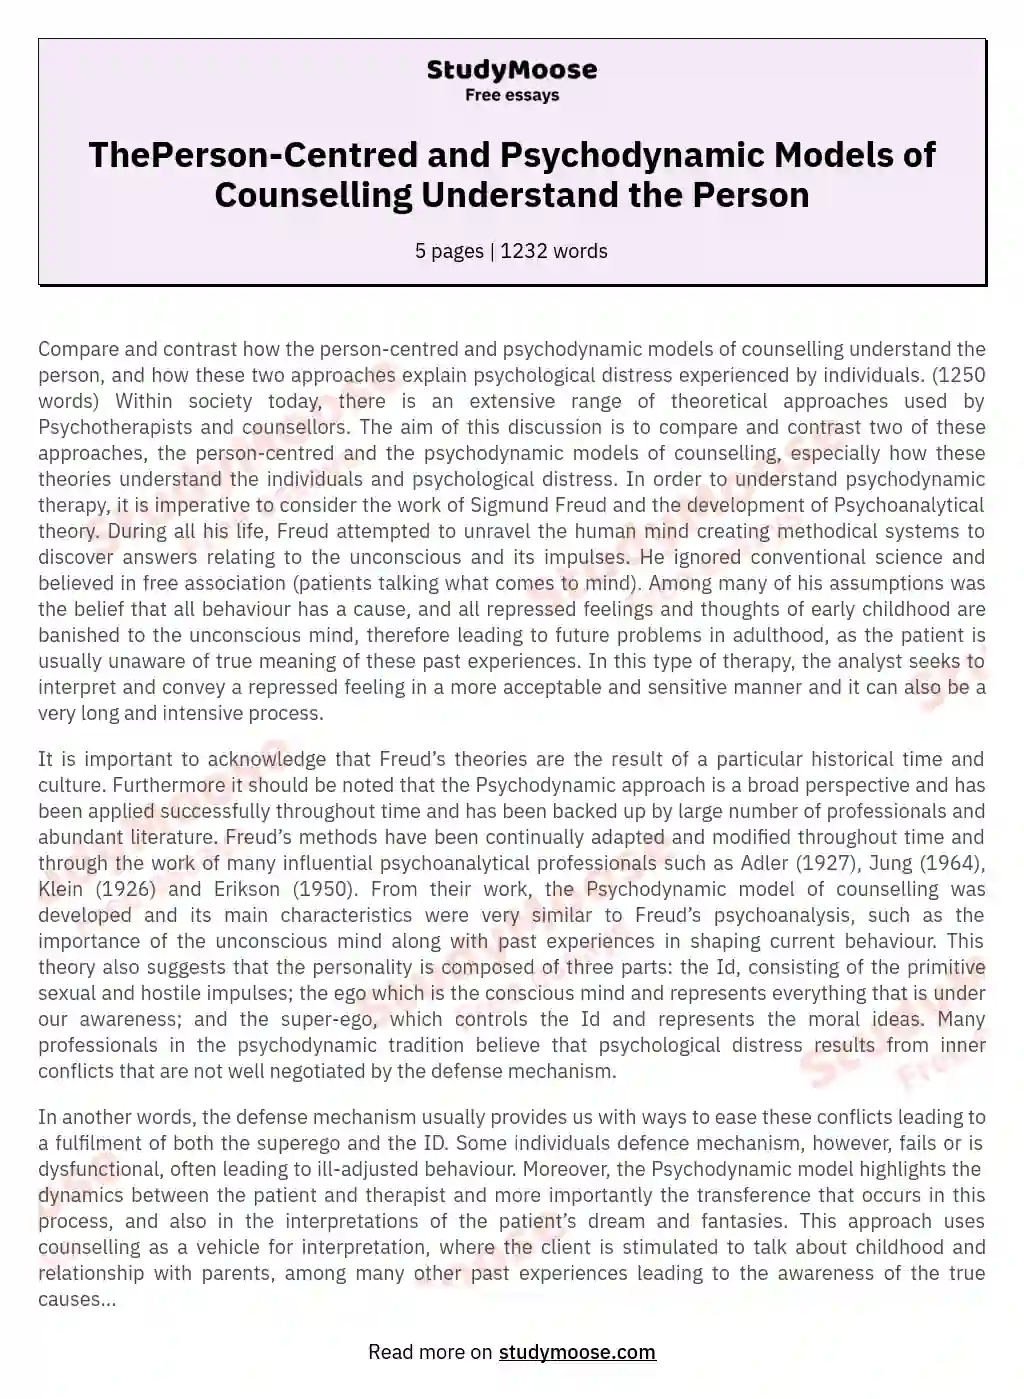 ThePerson-Centred and Psychodynamic Models of Counselling Understand the Person